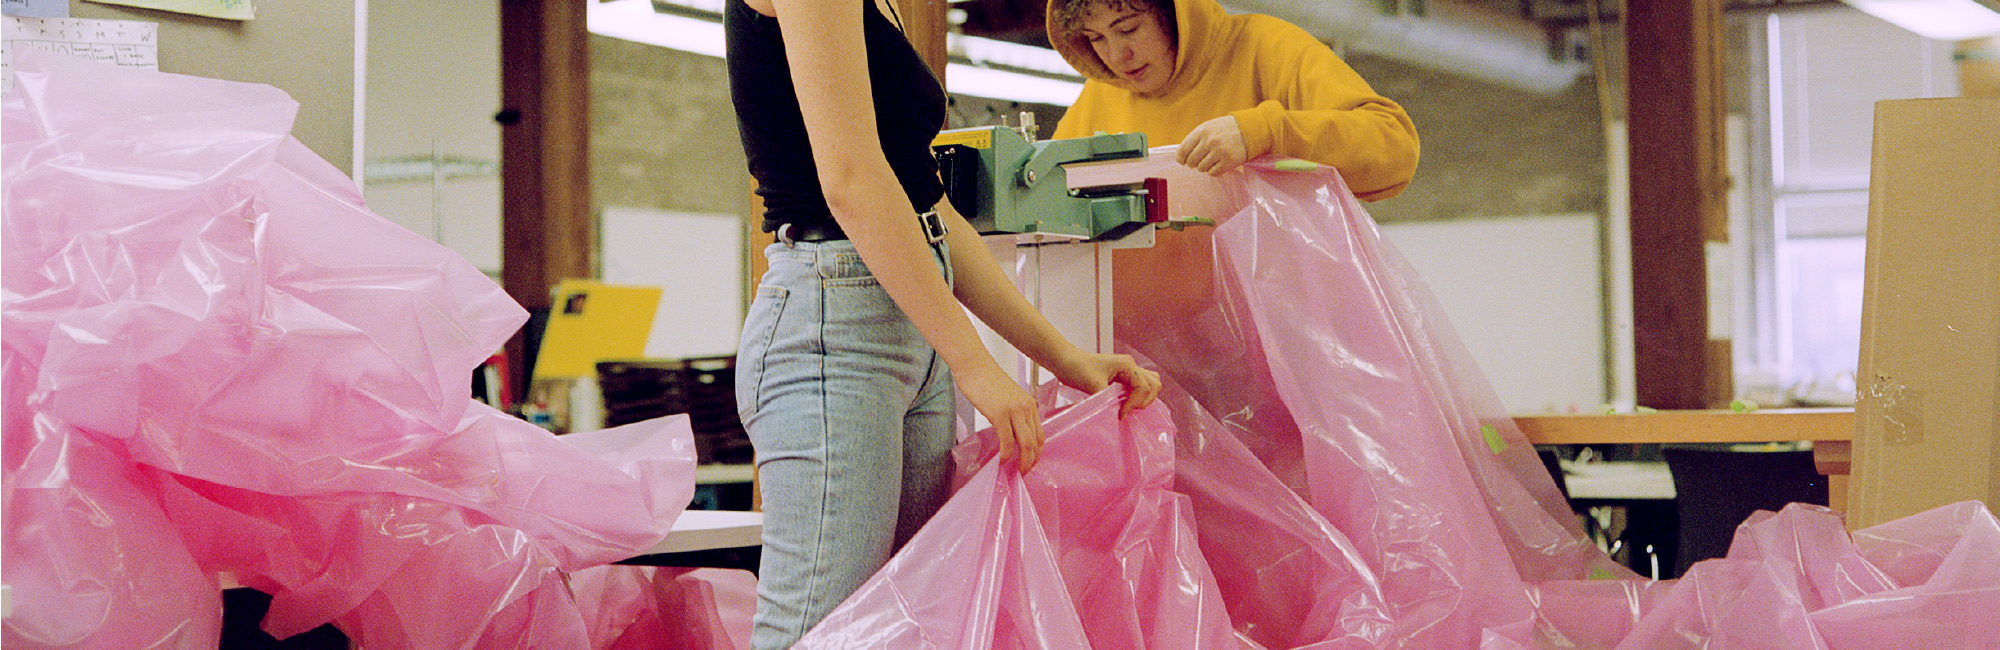 Emily Allan and Dominique Di Libero sealing sheets of pink plastic sheeting together.